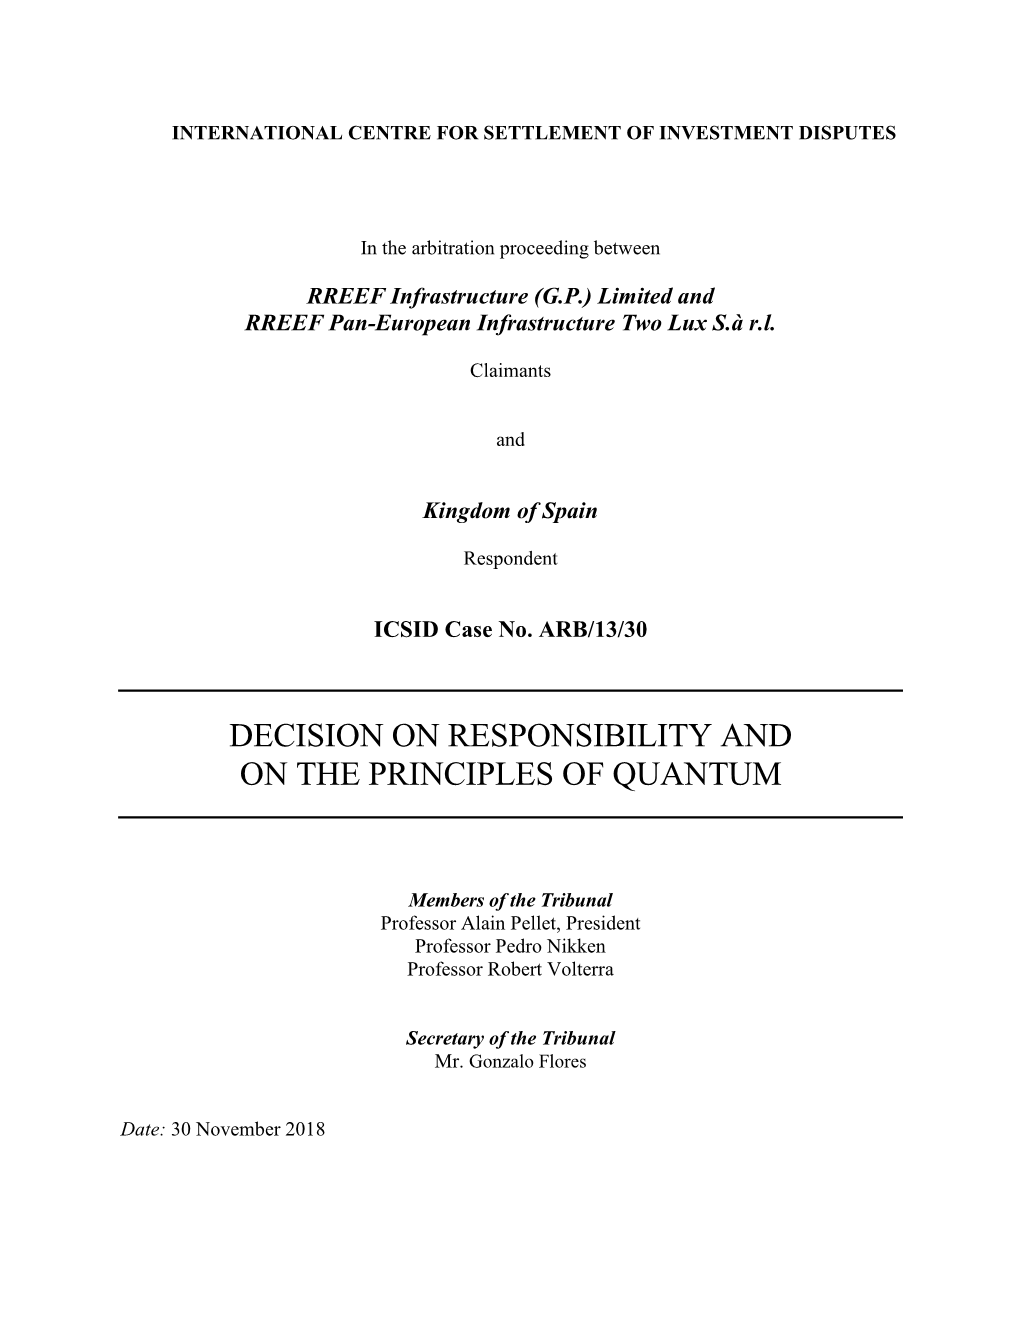 Decision on Responsibility and on the Principles of Quantum